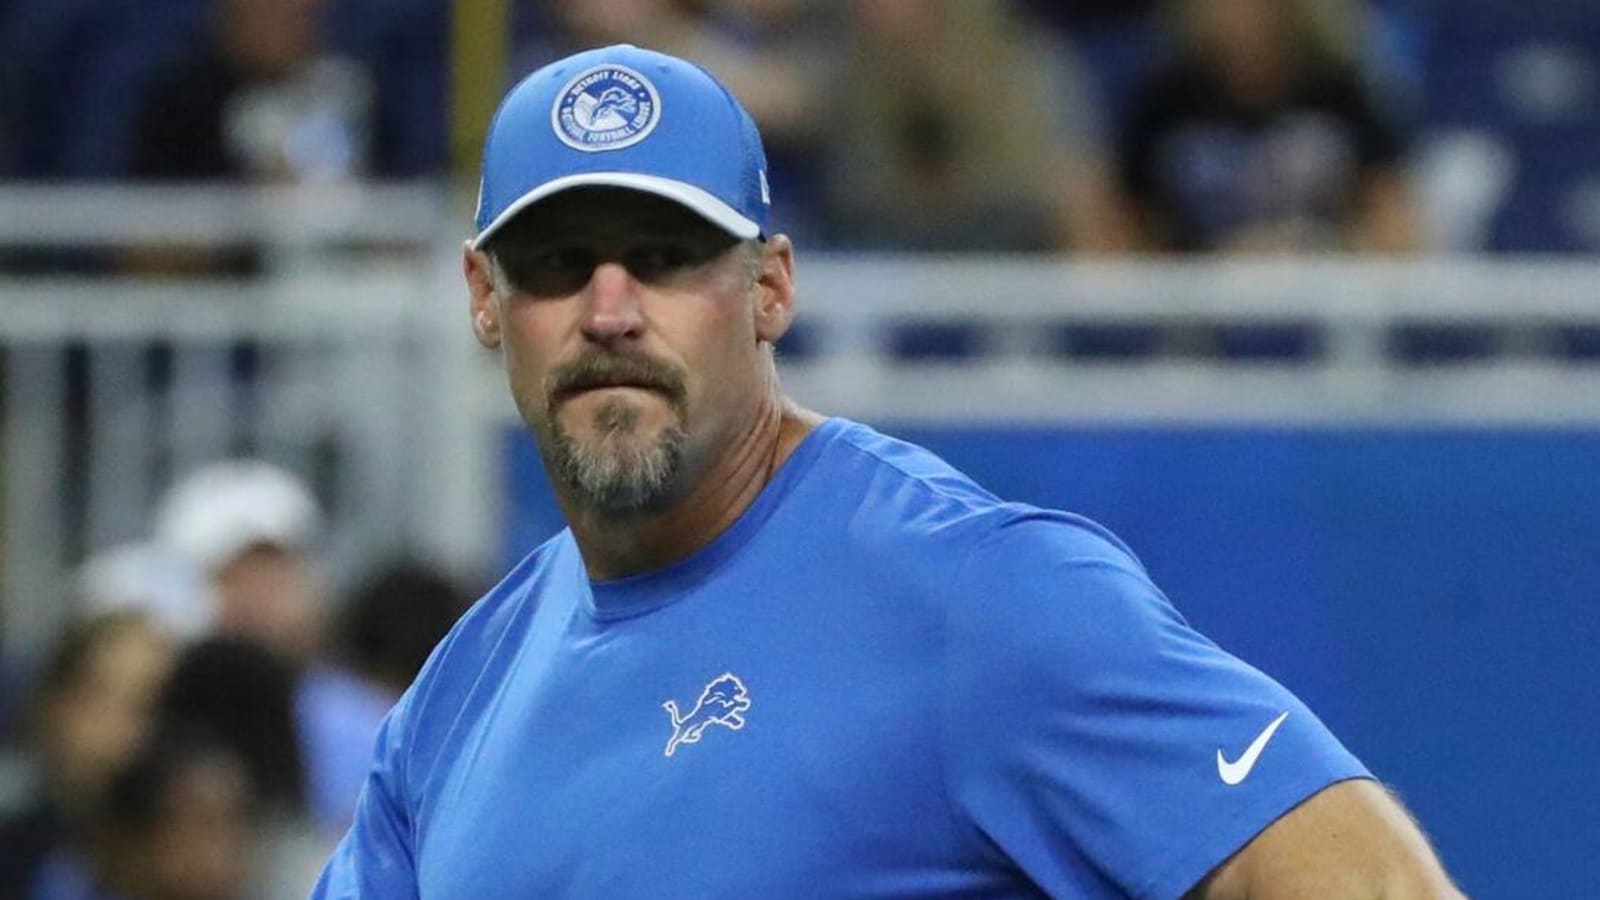 Dan Campbell gives his family hilarious advice for watching Lions games